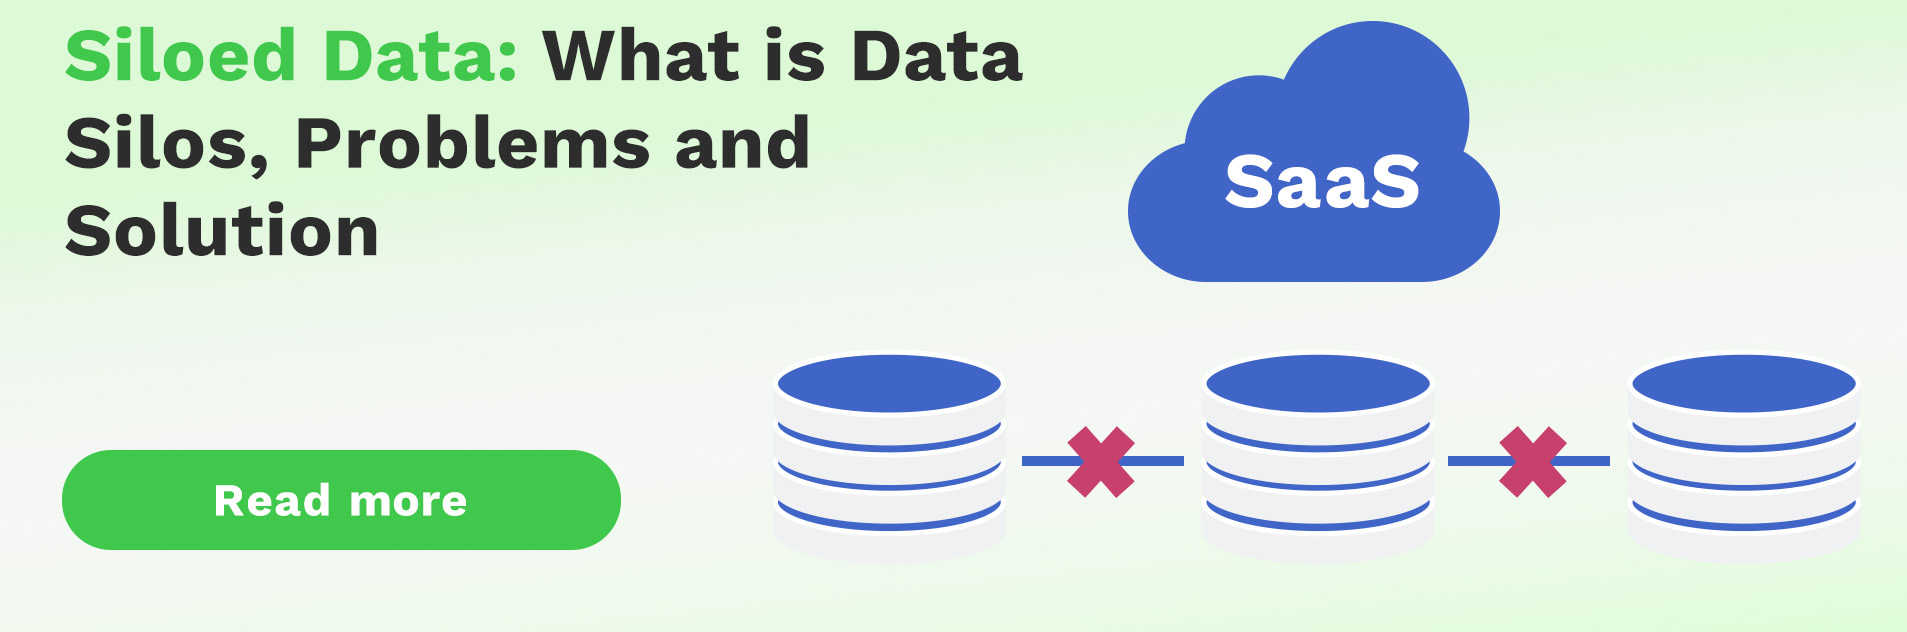 Siloed Data_ What is Data Silos, Problems and Solution